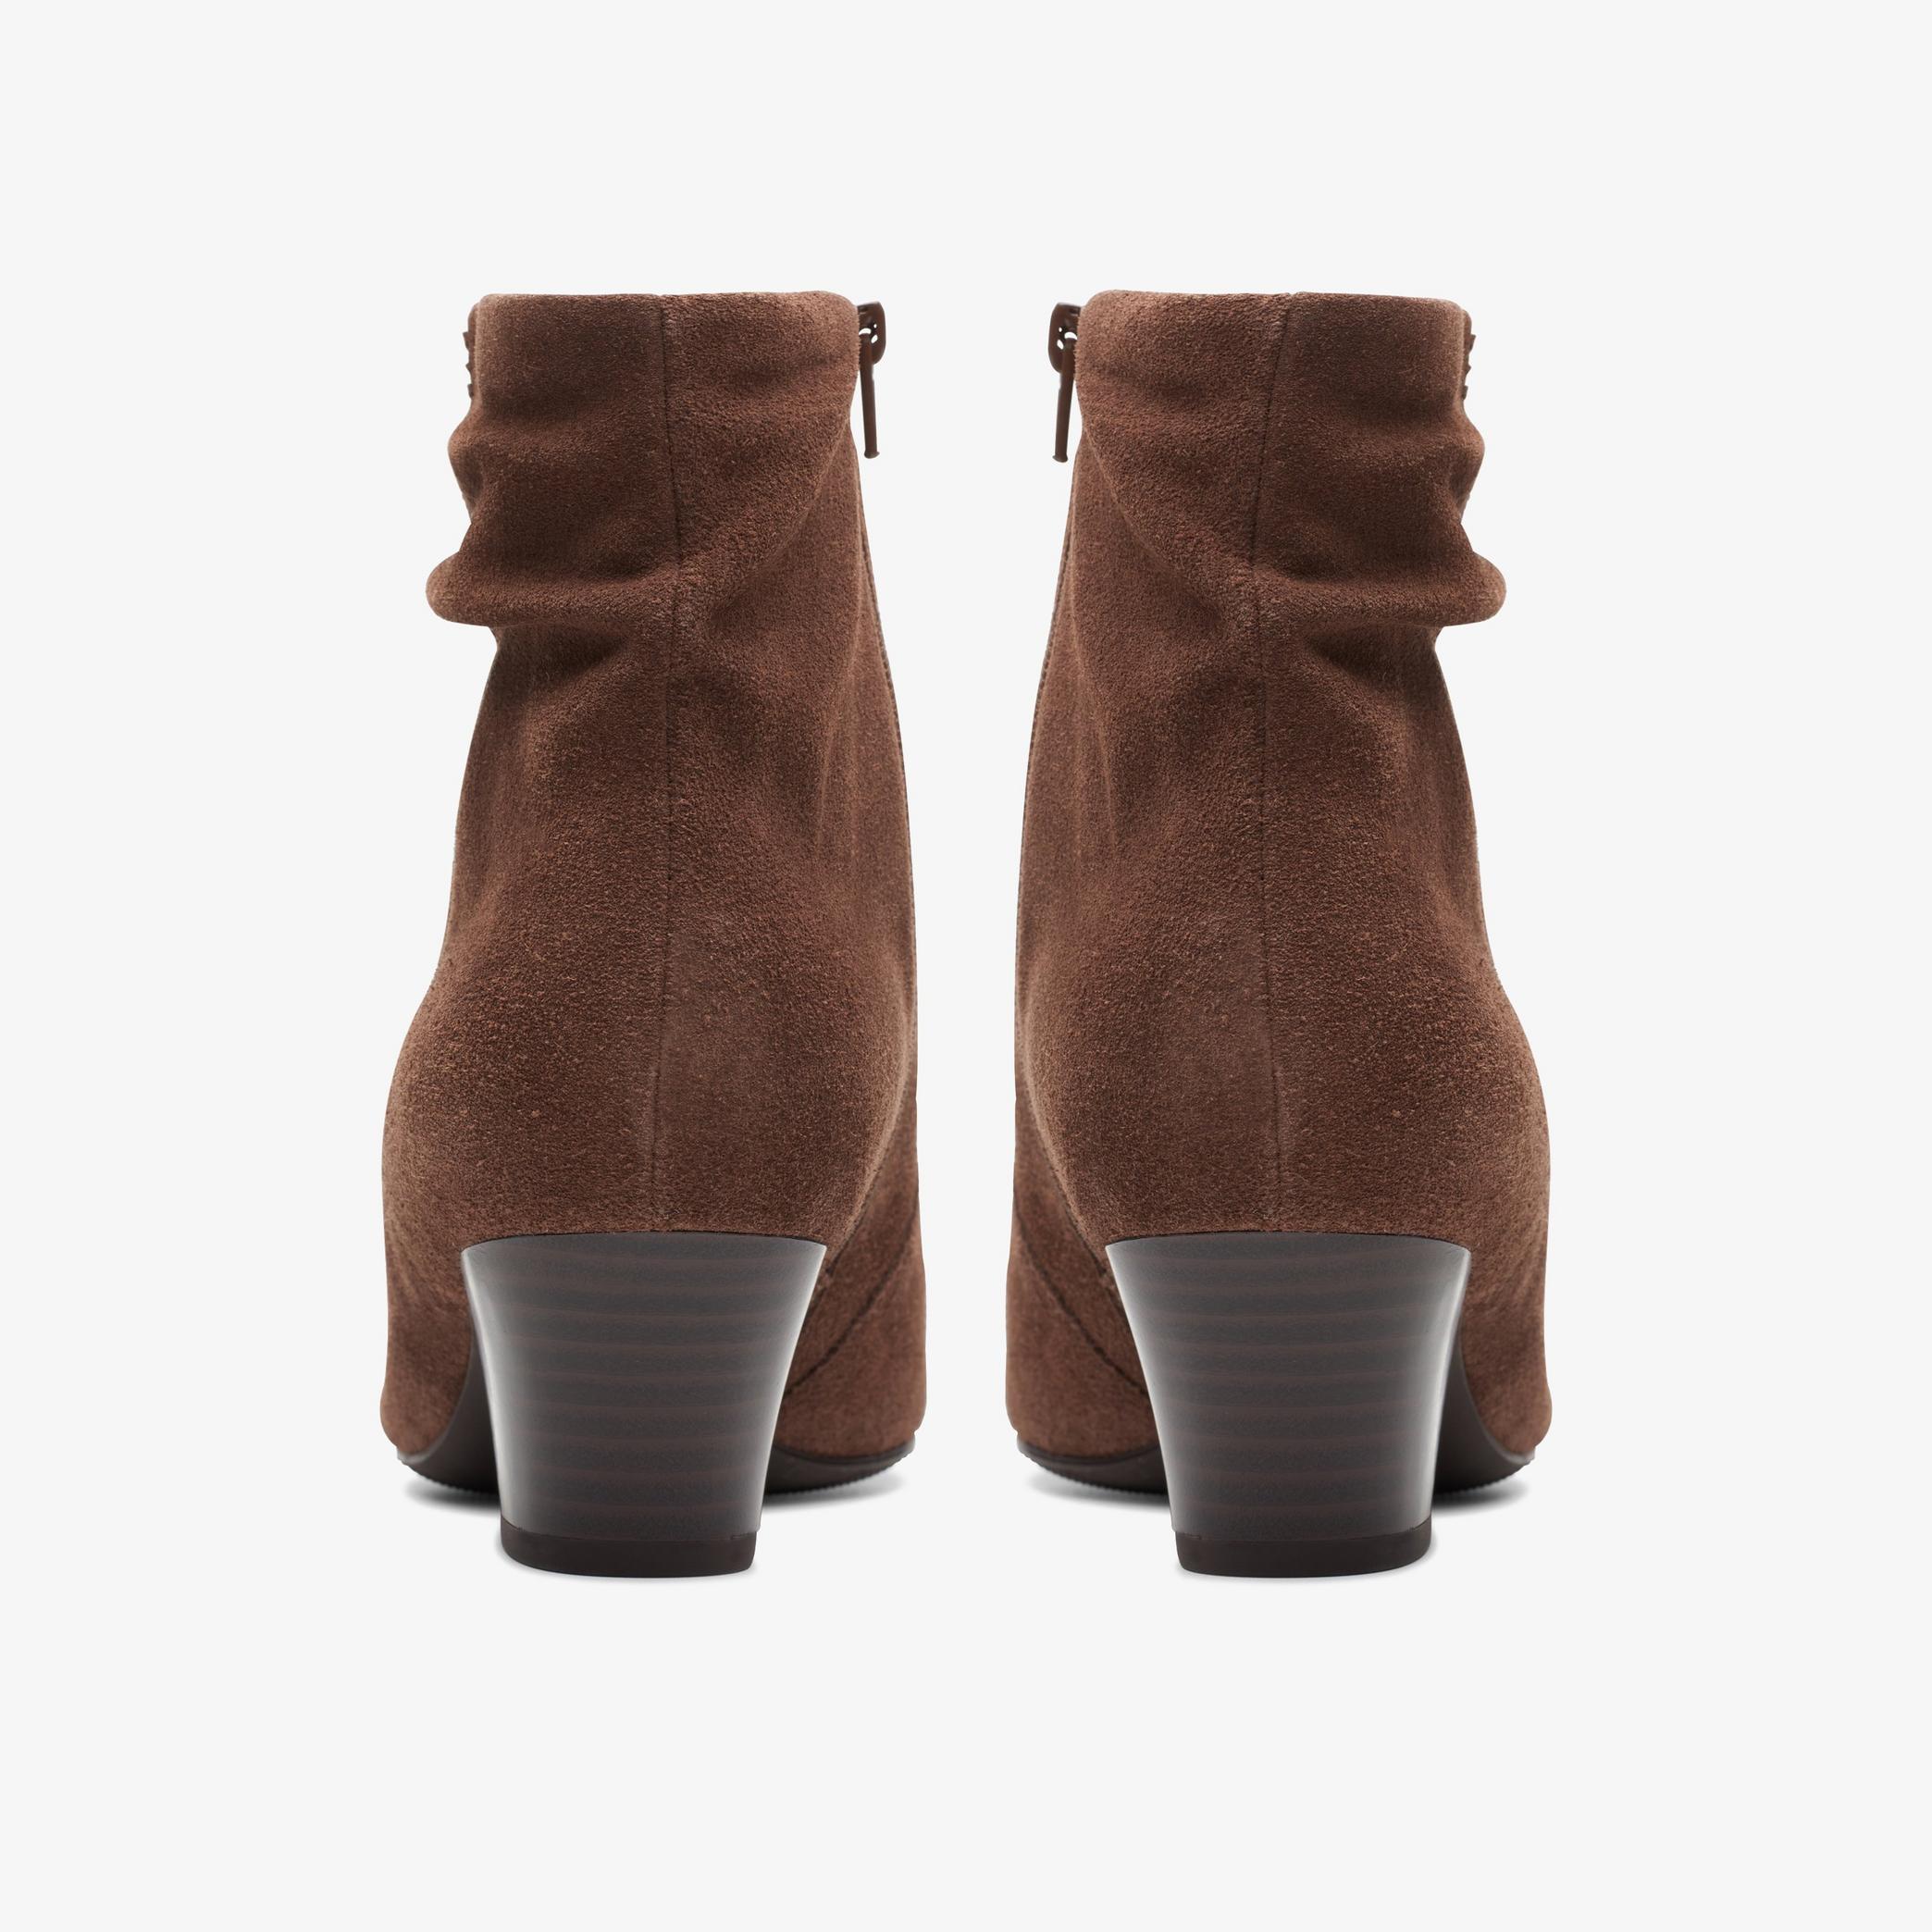 Teresa Skip Taupe Suede Ankle Boots, view 5 of 6